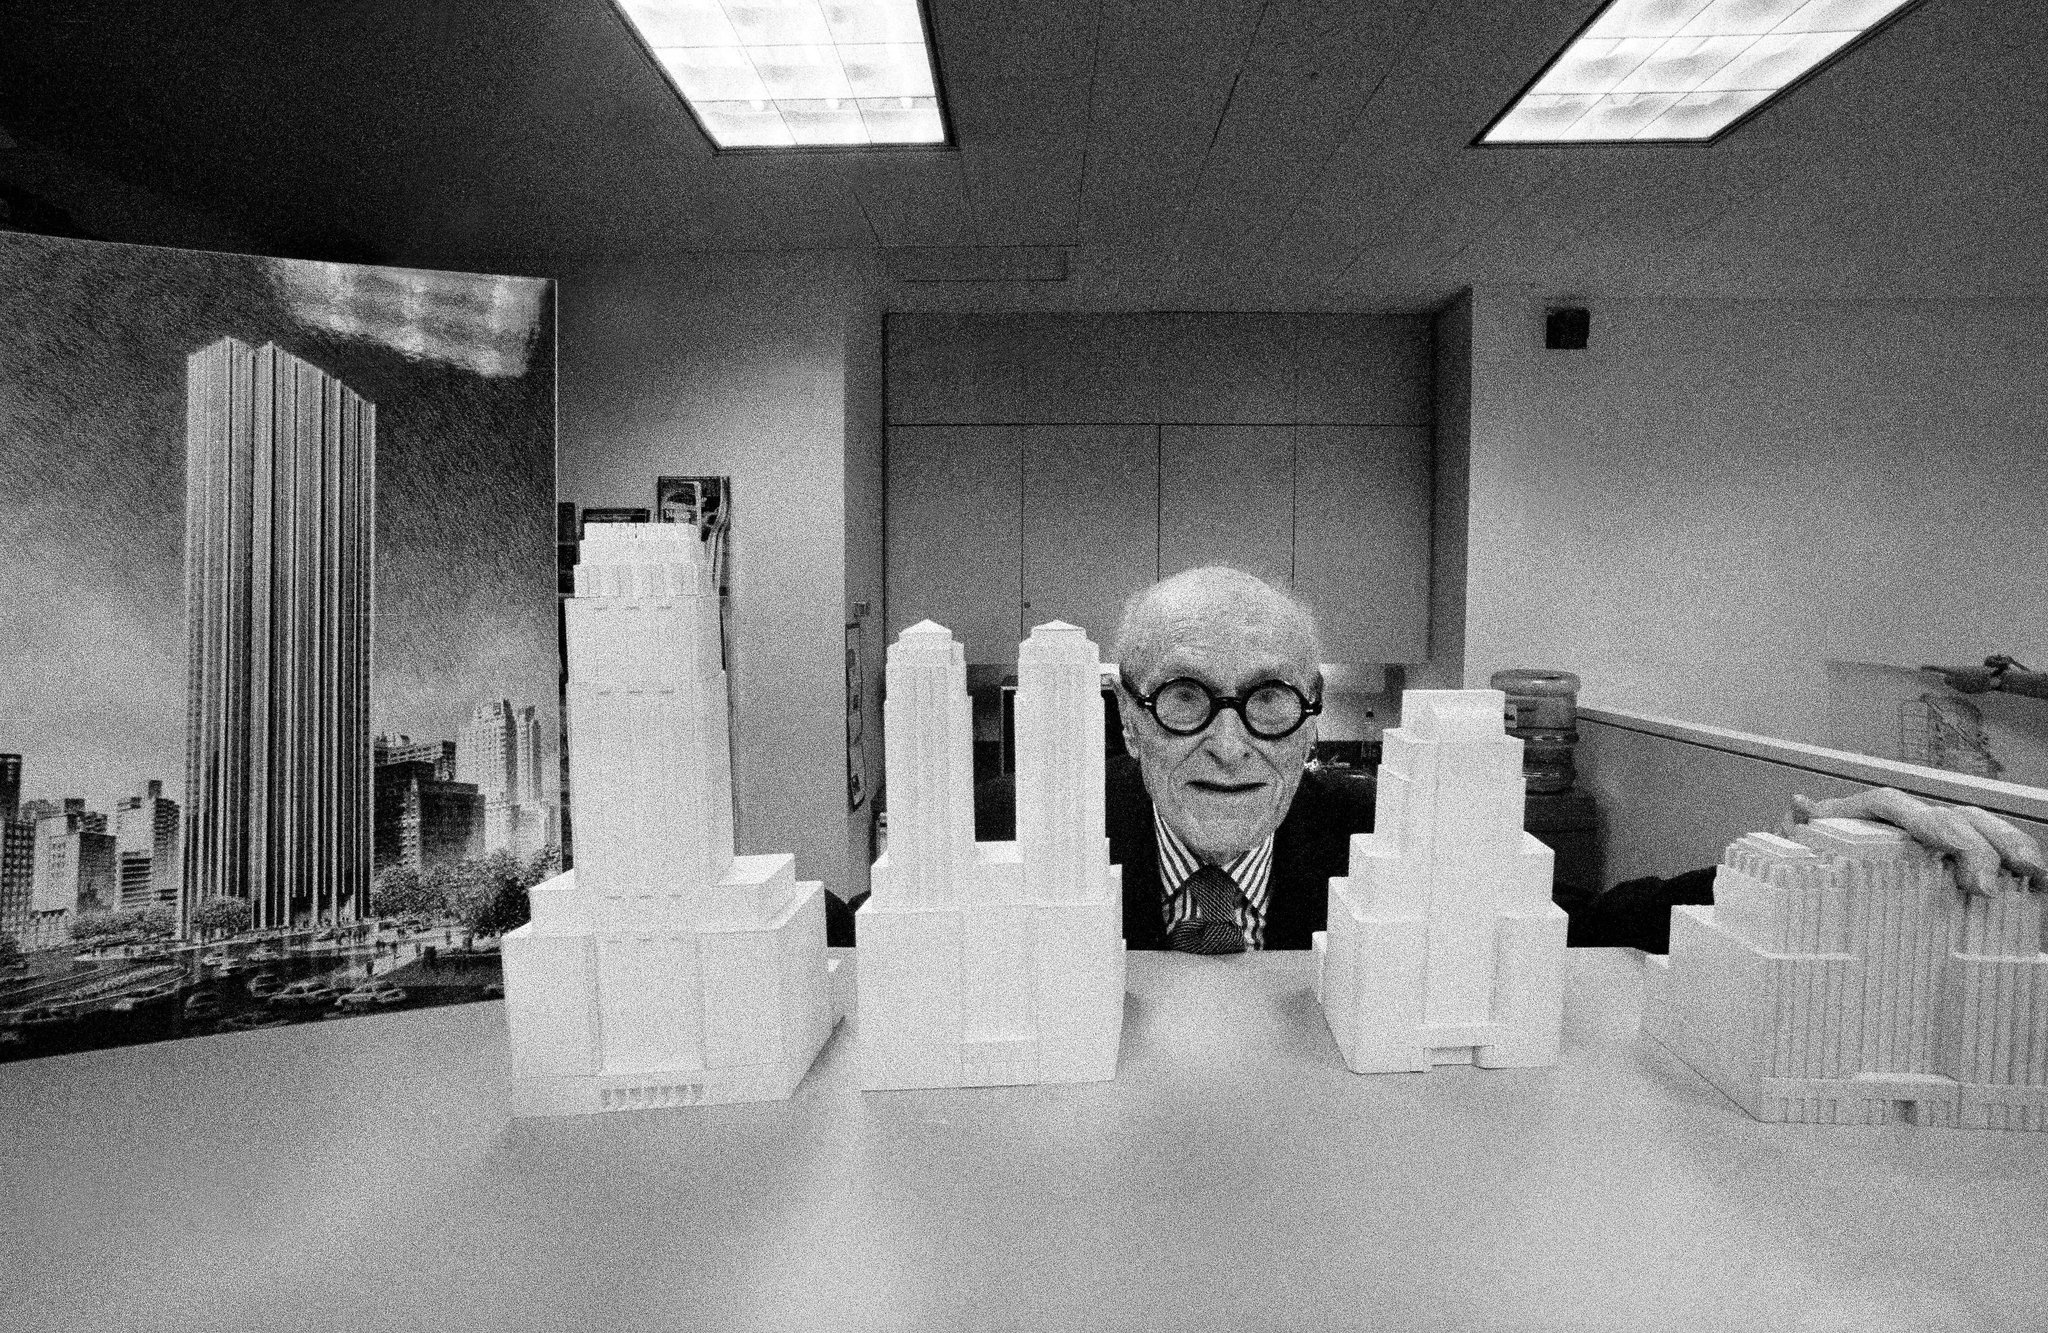 “I am a whore”: Philip Johnson at eighty